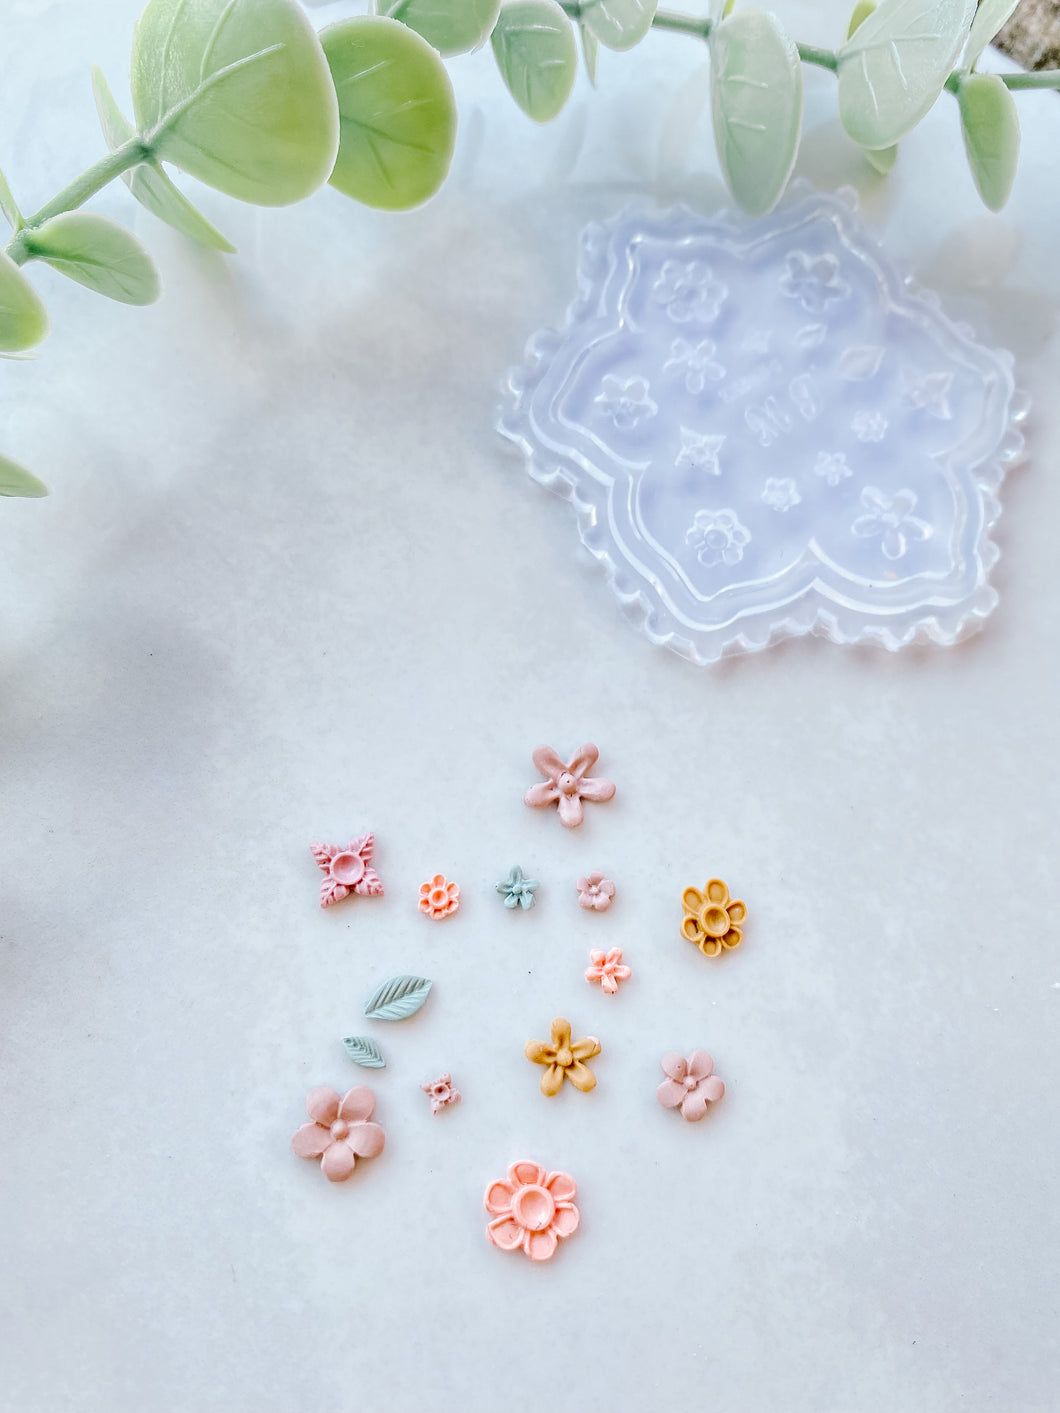 Micro Floral Mold 02